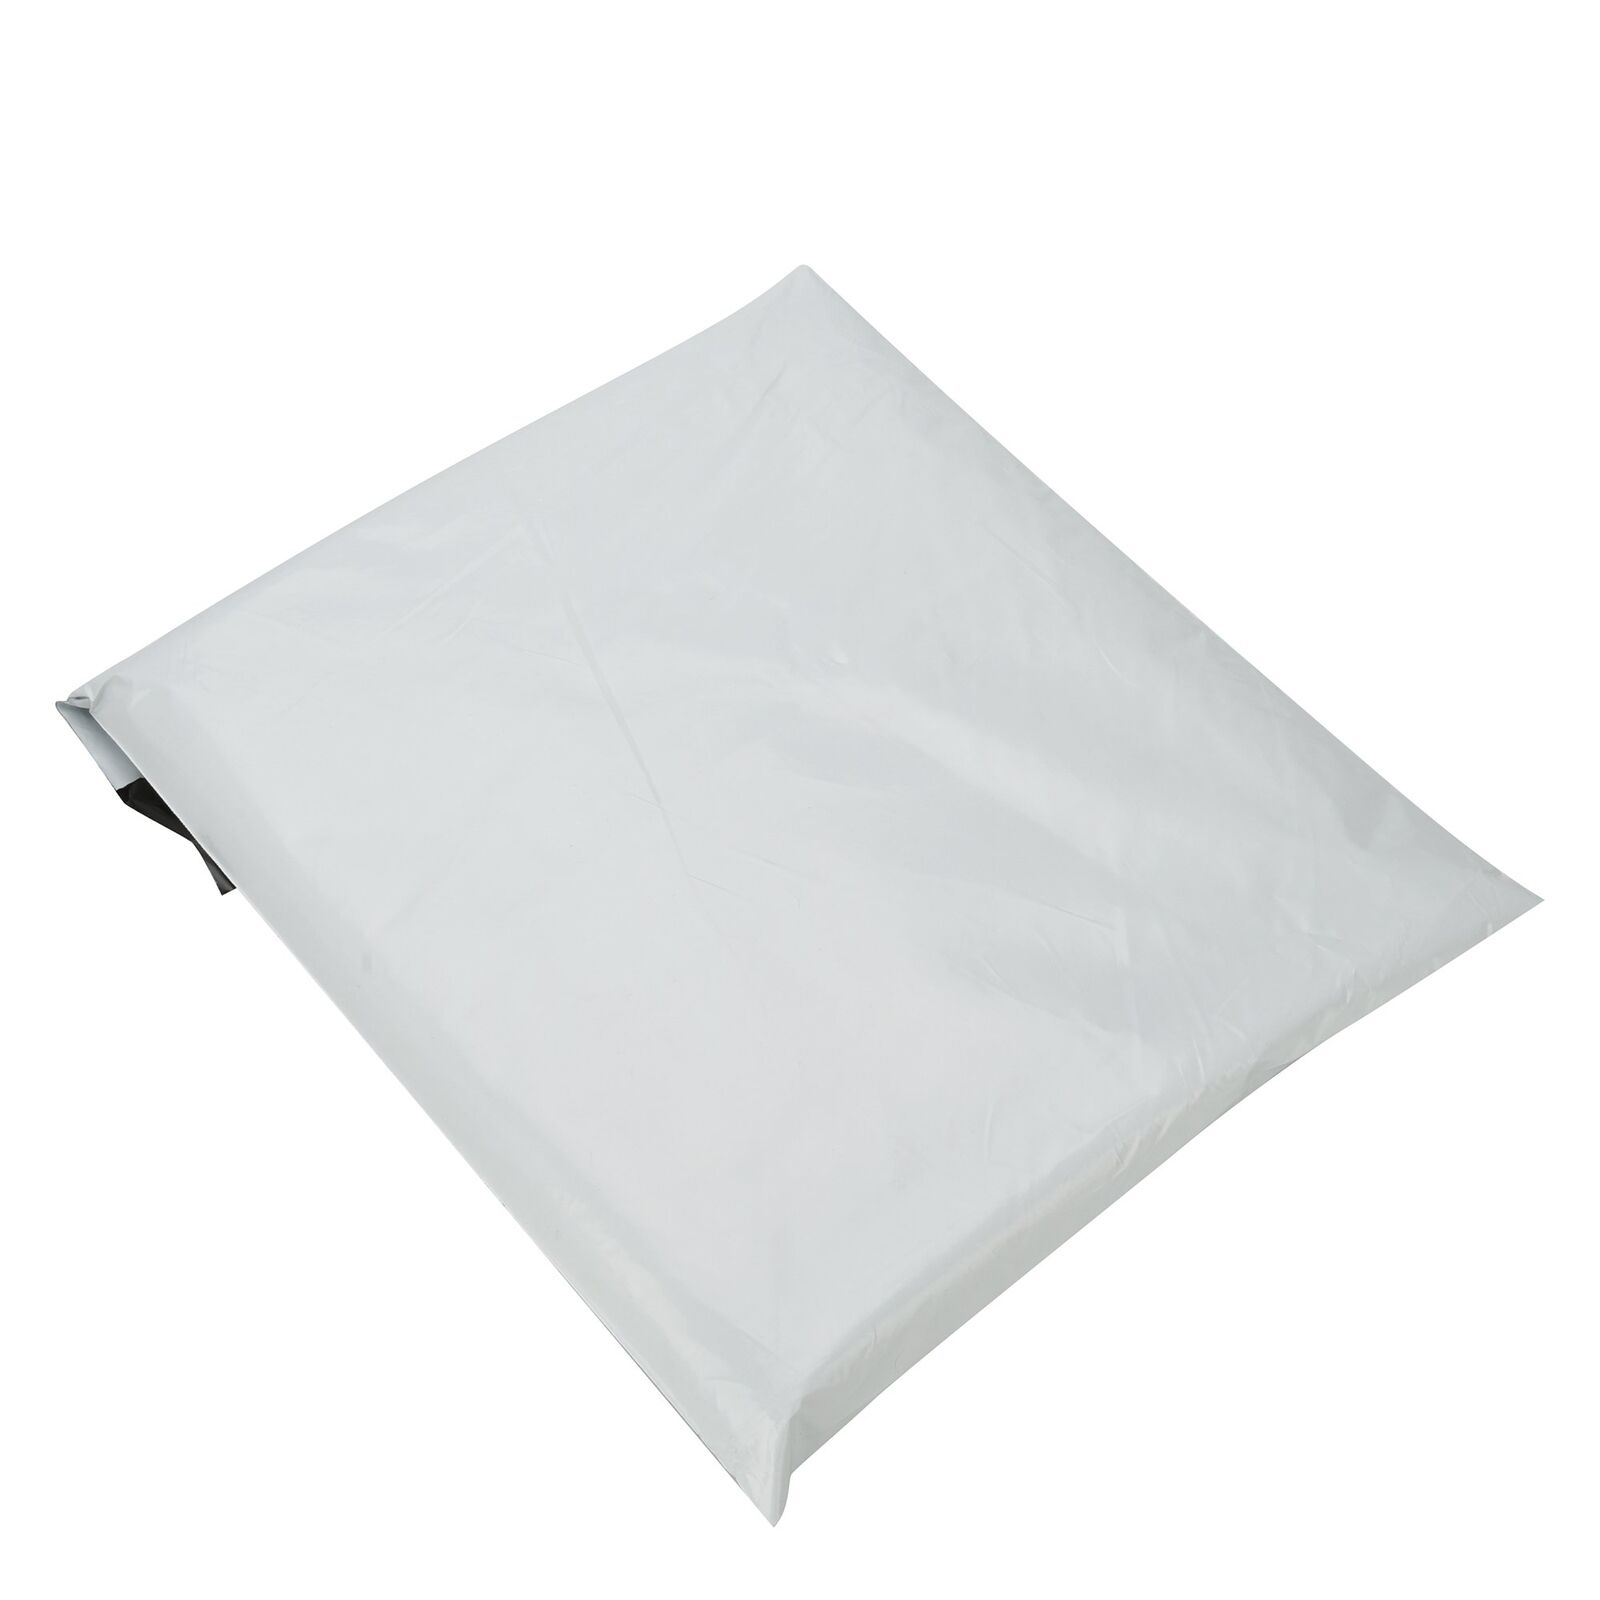 Poly Mailers 10x13 Shipping Envelopes 100 Plastic Packing & Mailing Bags 2.5 Mil Unbranded/Generic Does Not Apply - фотография #2